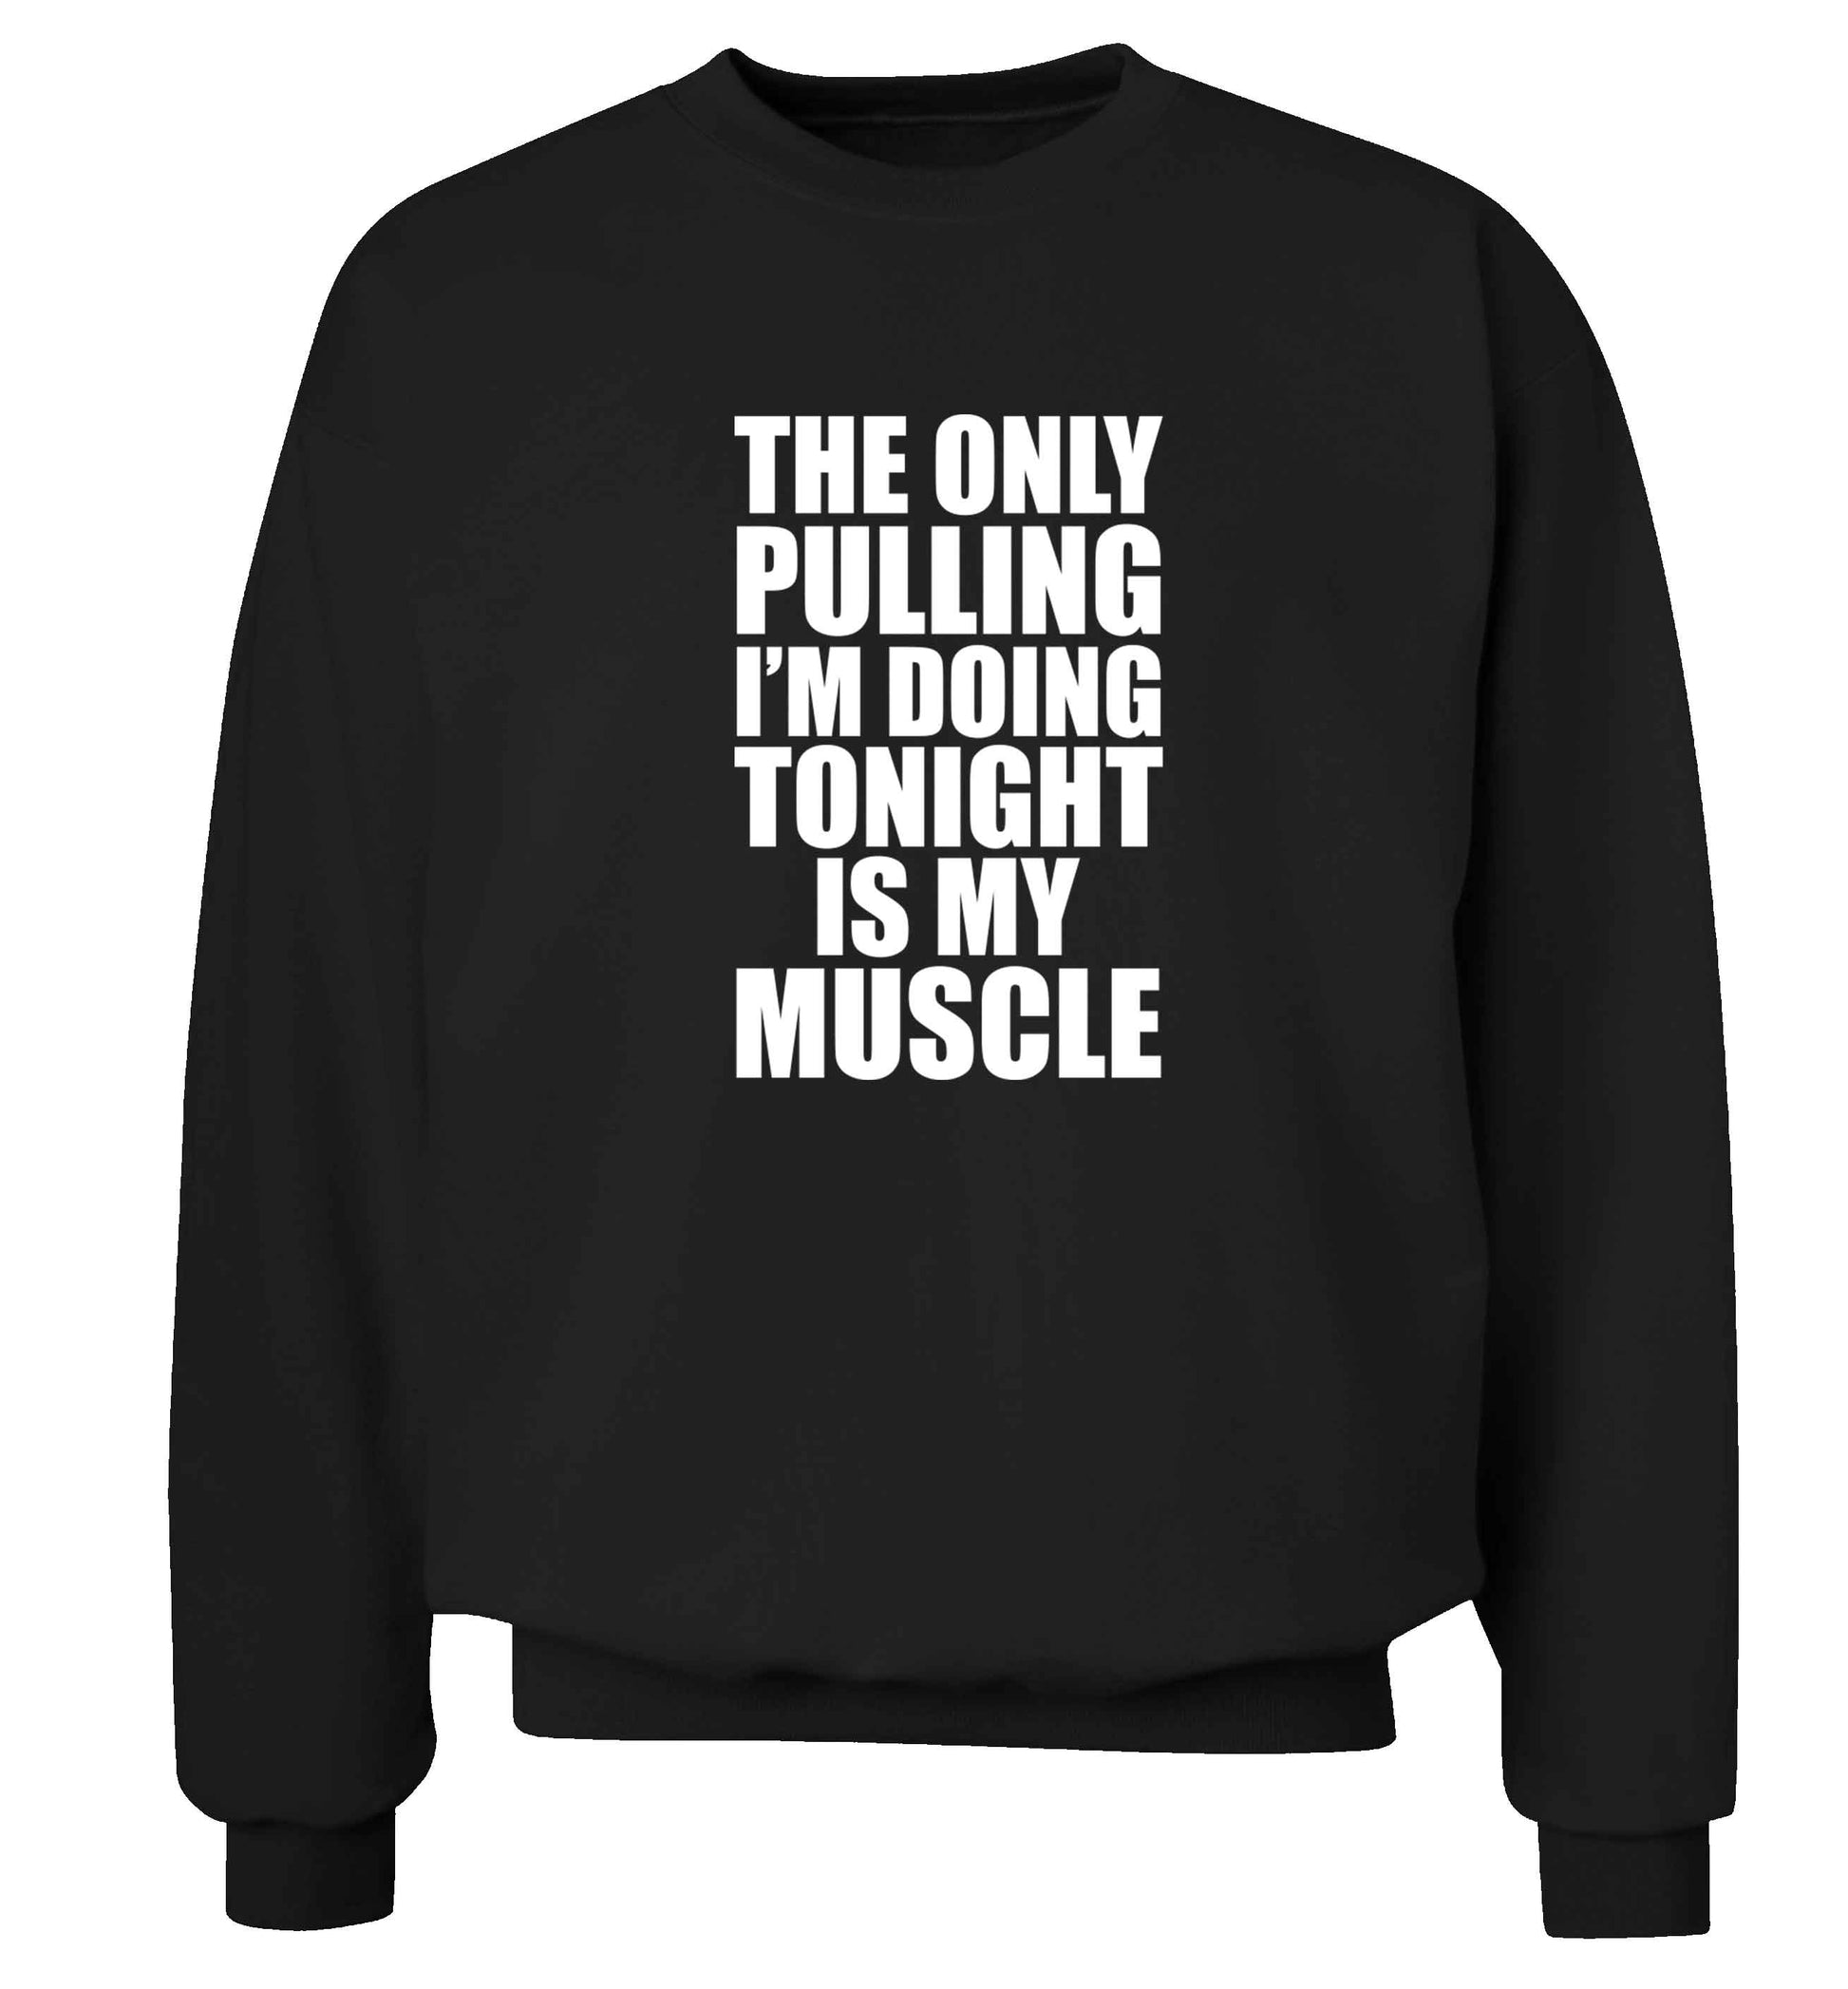 The only pulling I'm doing tonight is my muscle adult's unisex black sweater 2XL